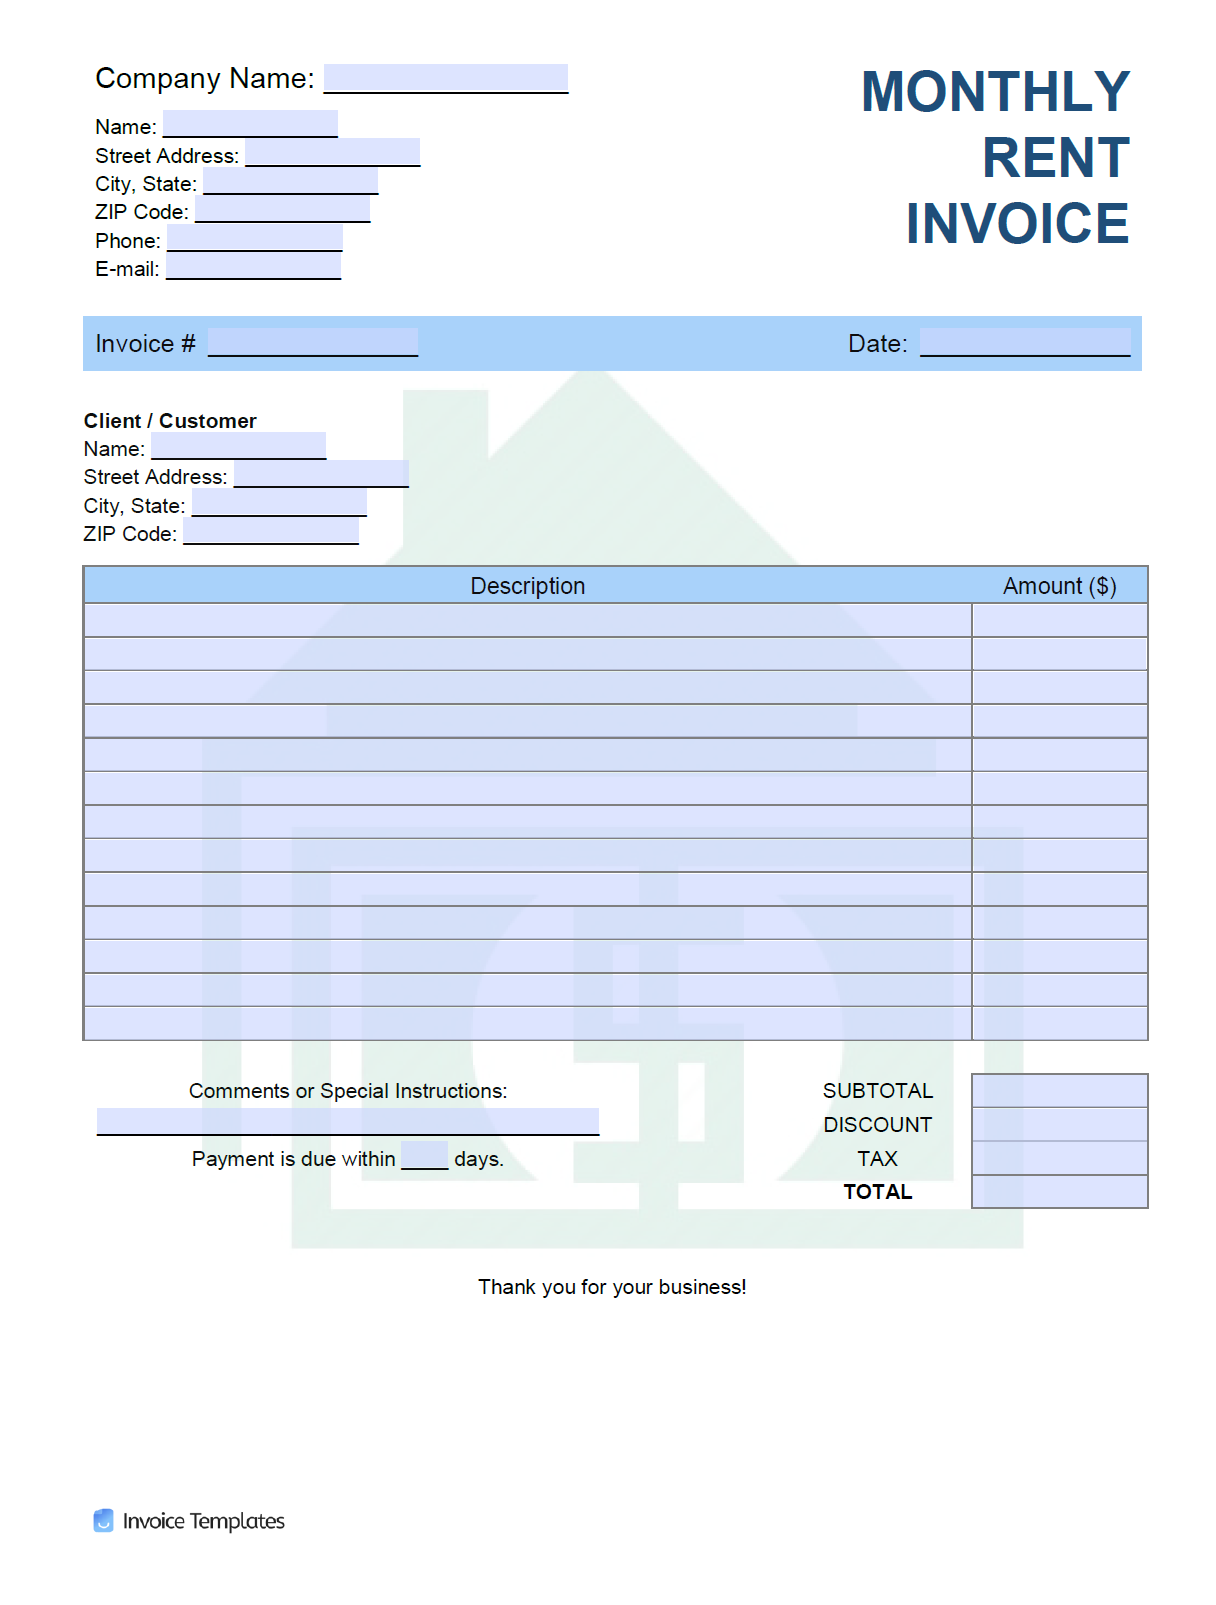 Rent Paid Receipt Template from invoicetemplates.com